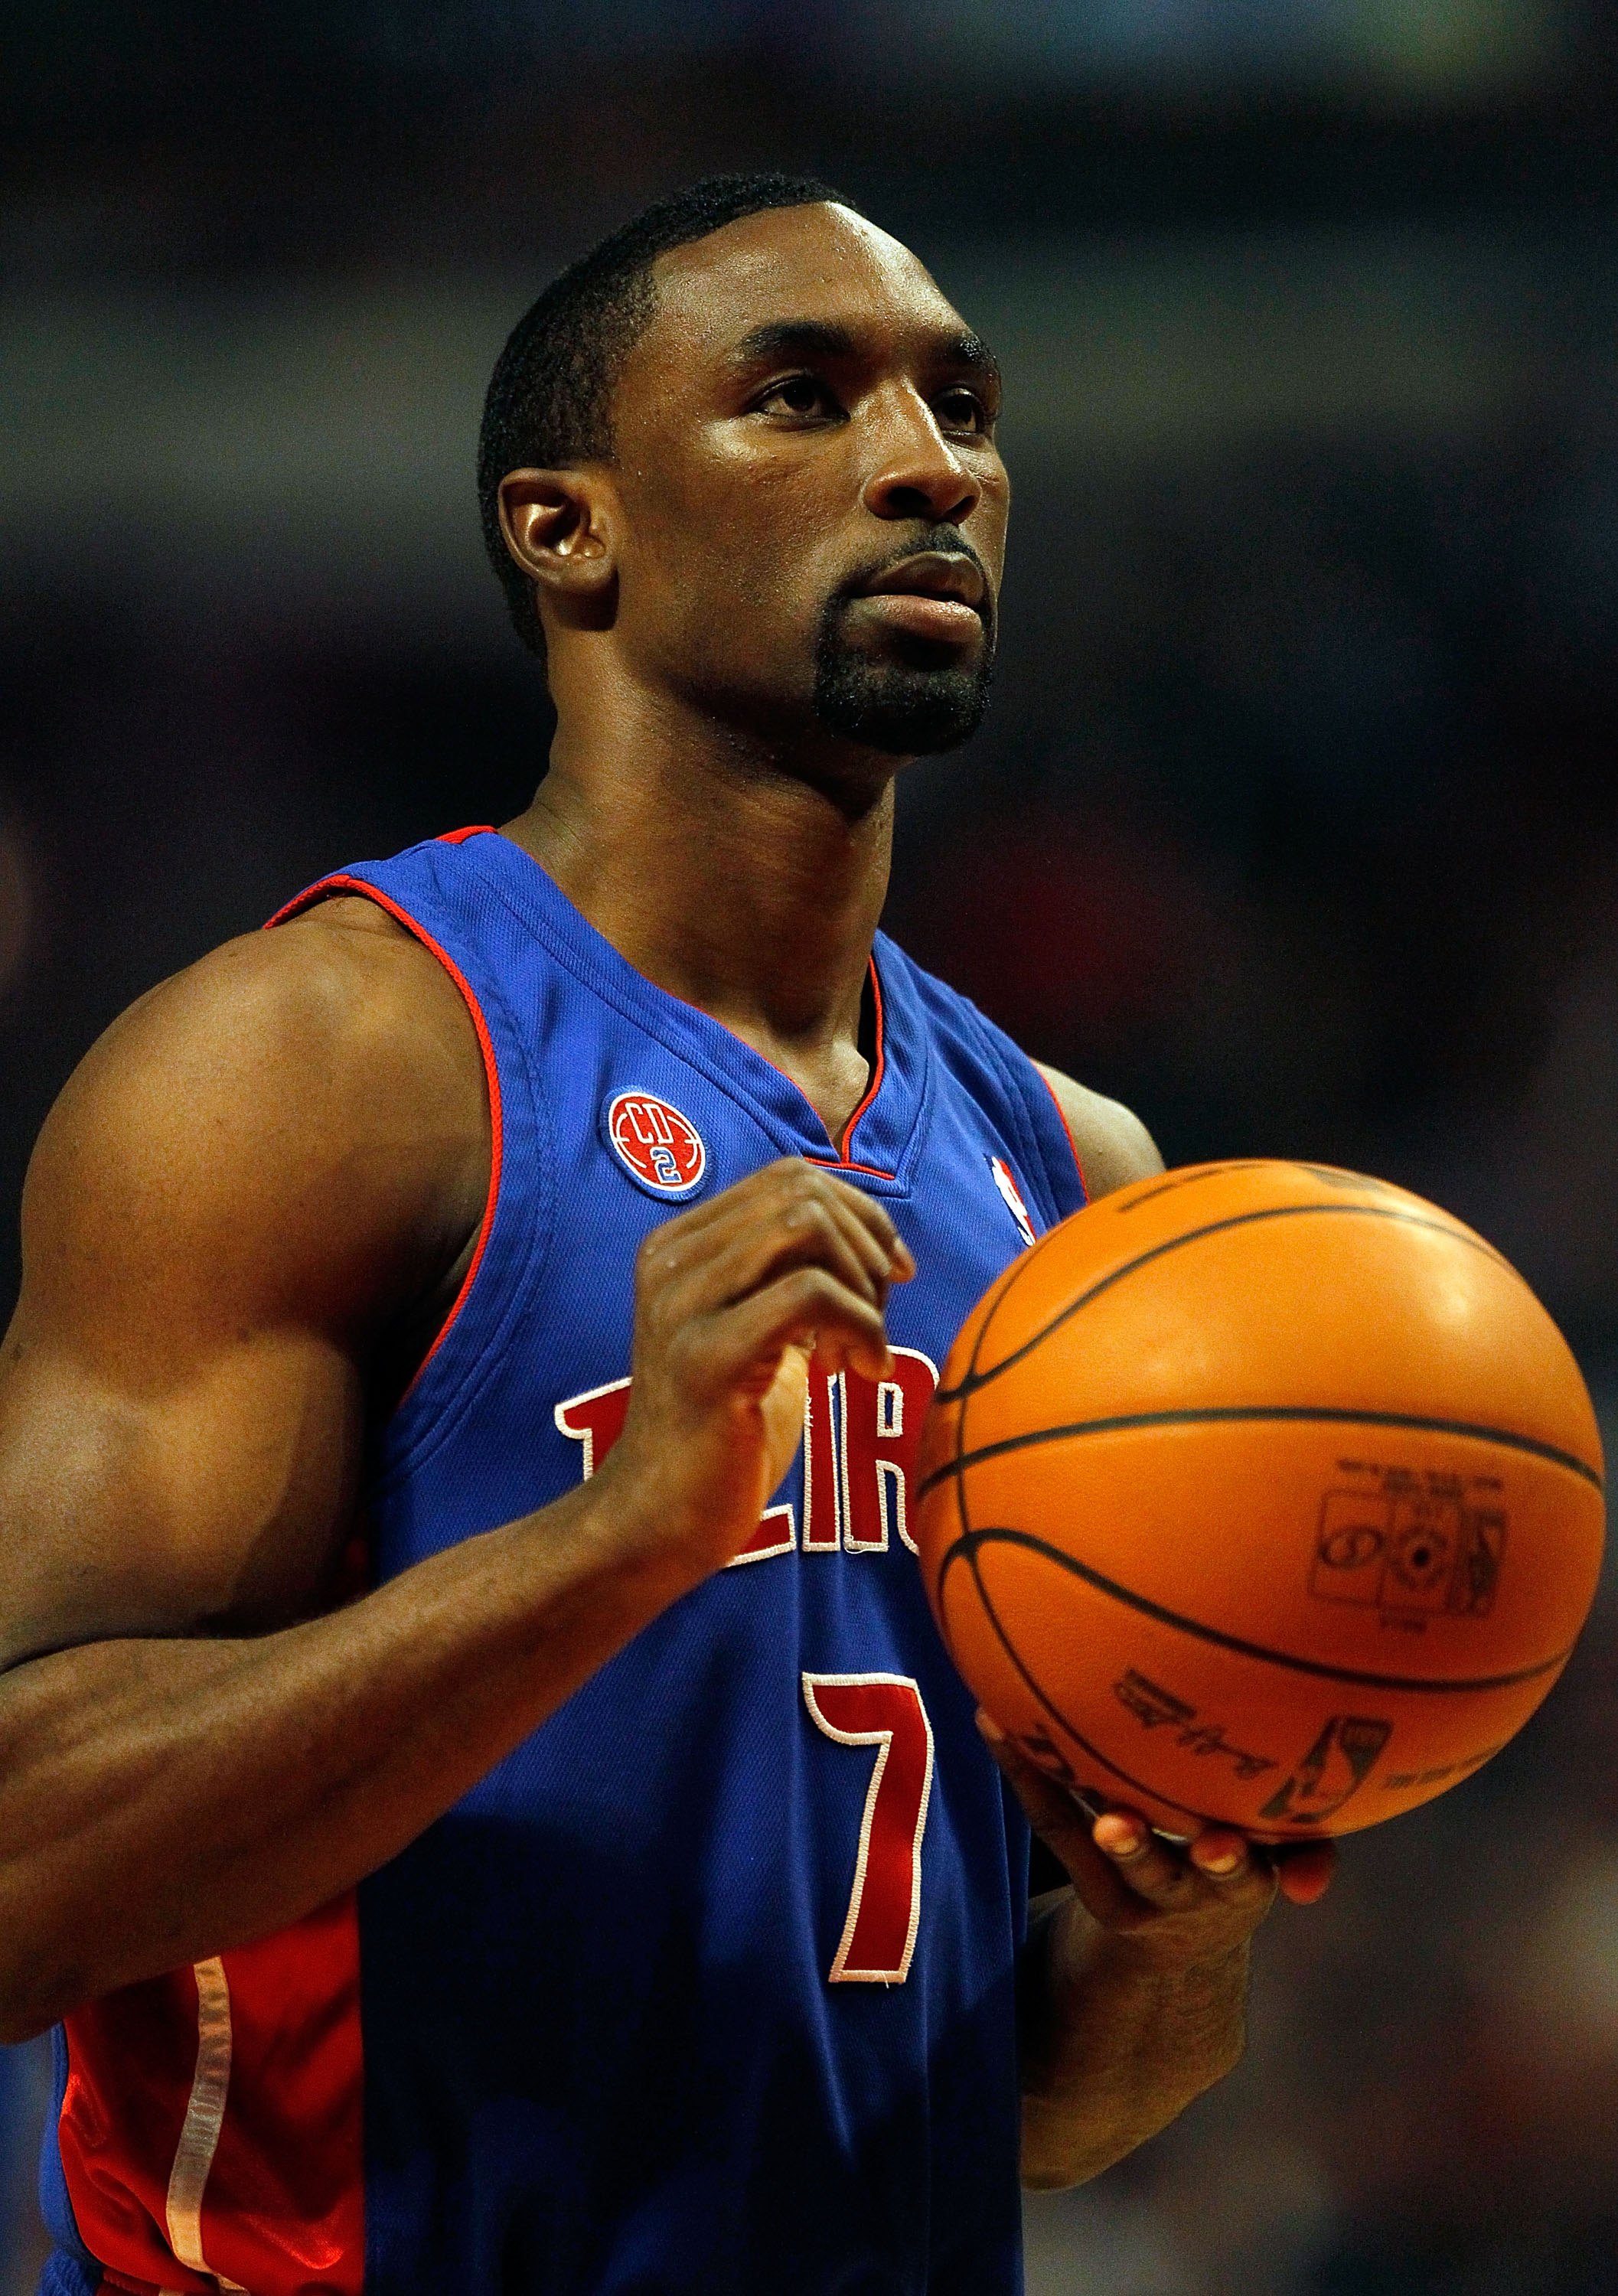 CHICAGO - DECEMBER 02: Ben Gordon #7 of the Detroit Pistons waits to shoot a free-throw against the Chicago Bulls at the United Center on December 2, 2009 in Chicago, Illinois. The Bulls defeated the Pistons 92-85. NOTE TO USER: User expressly acknowledge